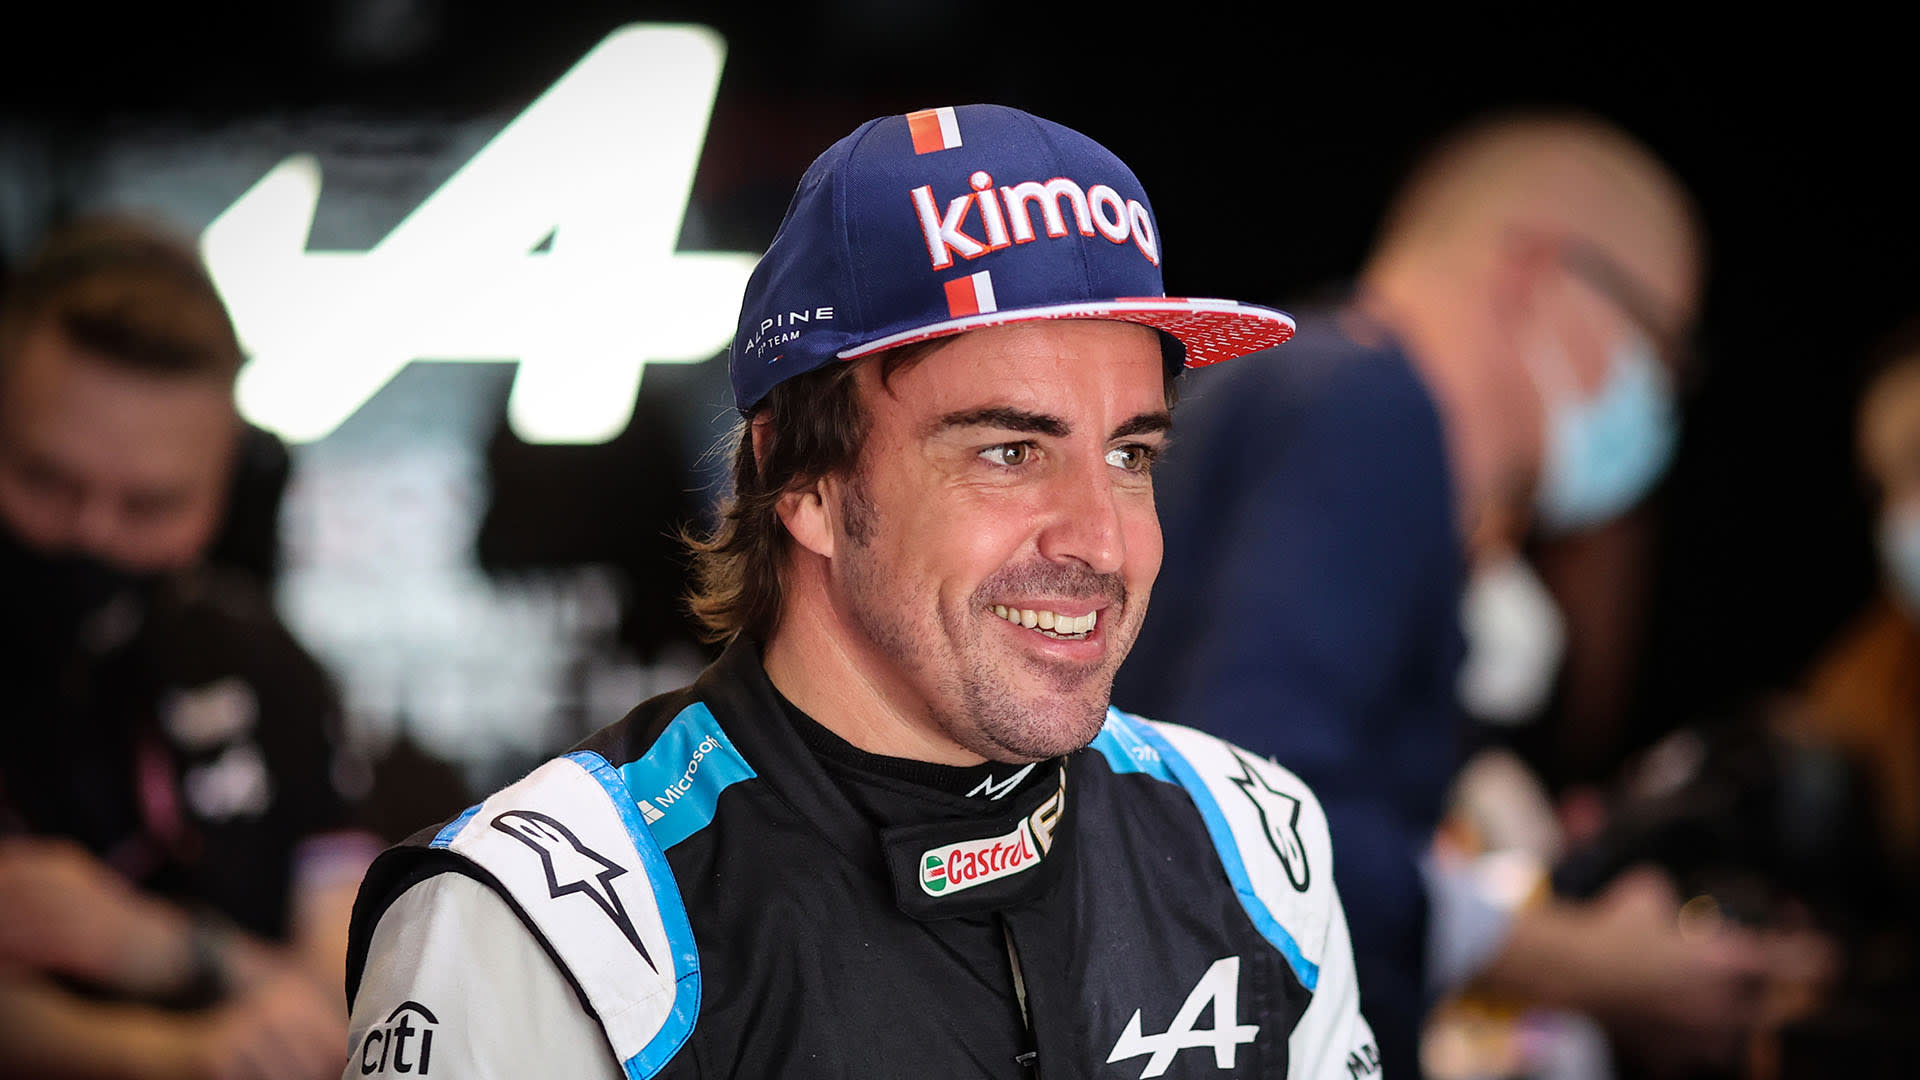 A Stunning Comeback for Fernando Alonso in Formula 1 - The New York Times